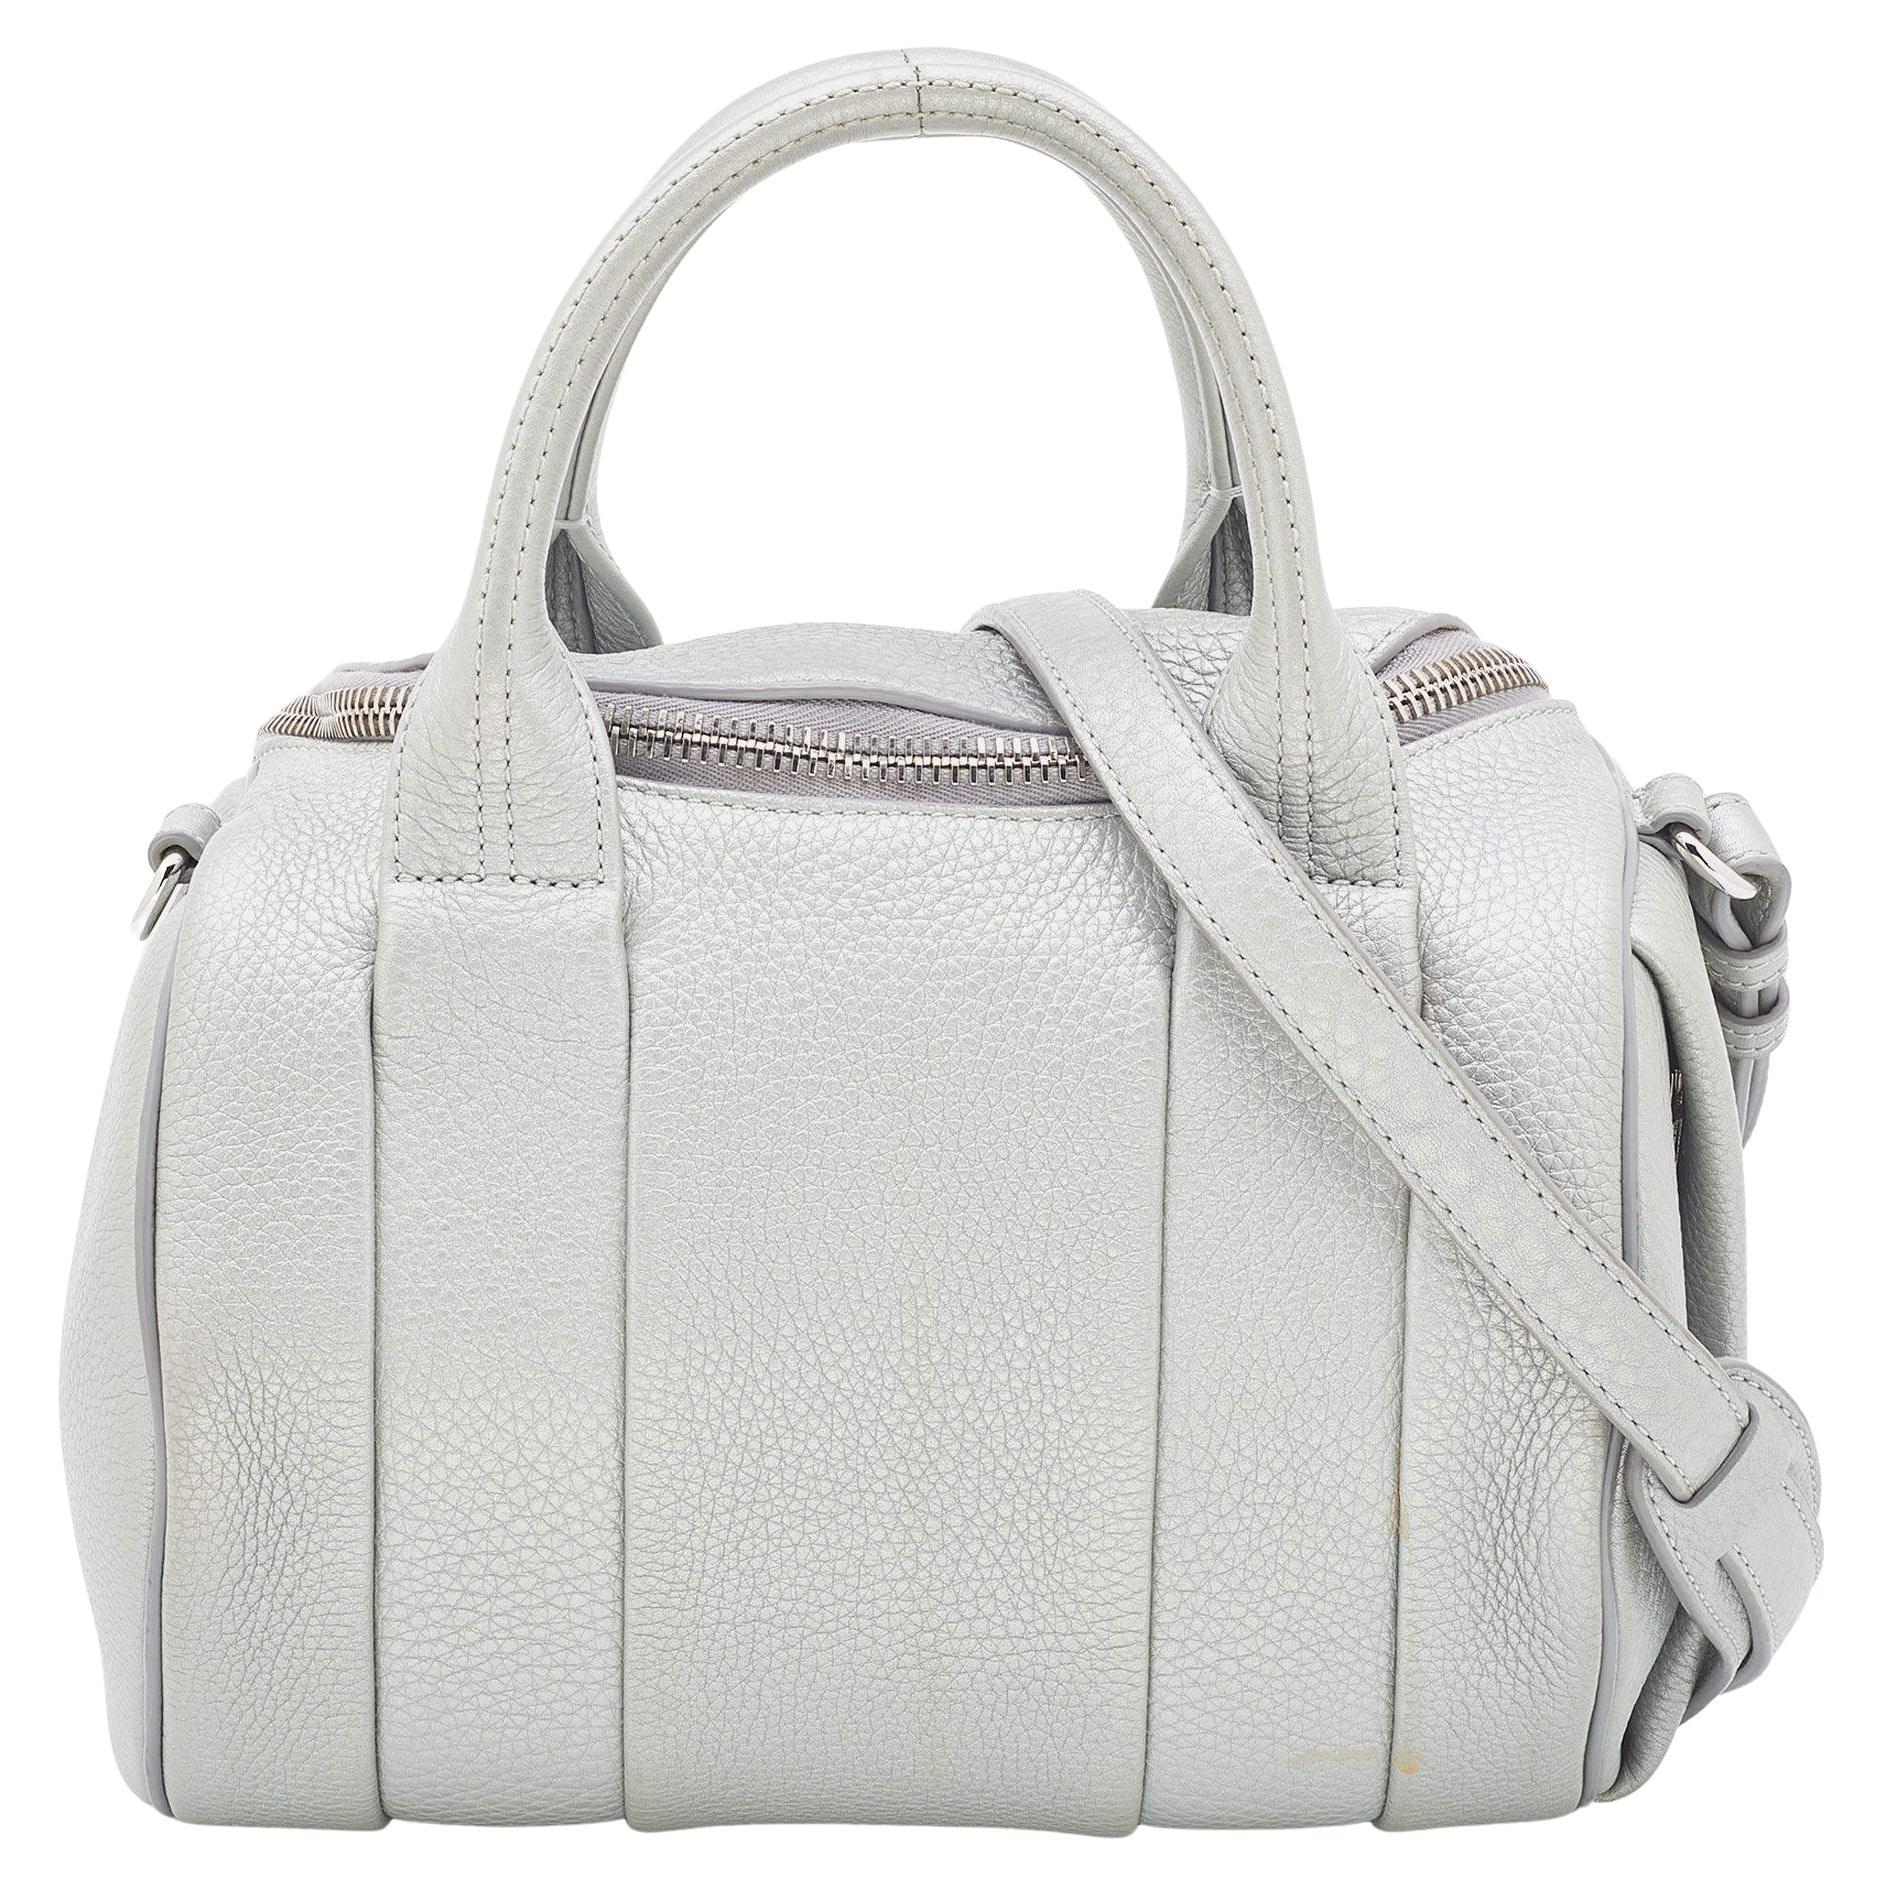 Alexander Wang Silver Textured Leather Rocco Bag